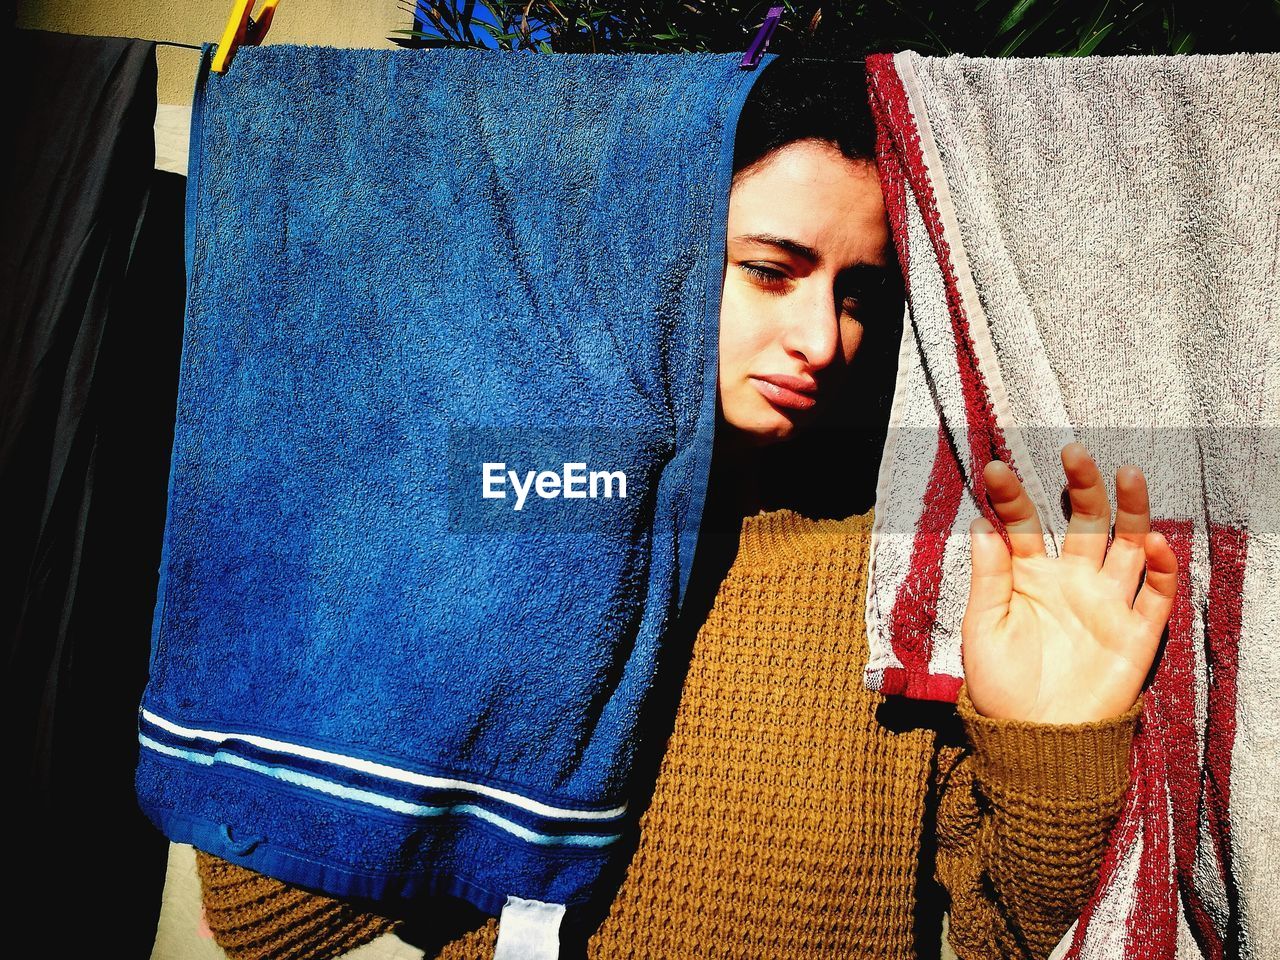 Young woman standing amidst towels drying